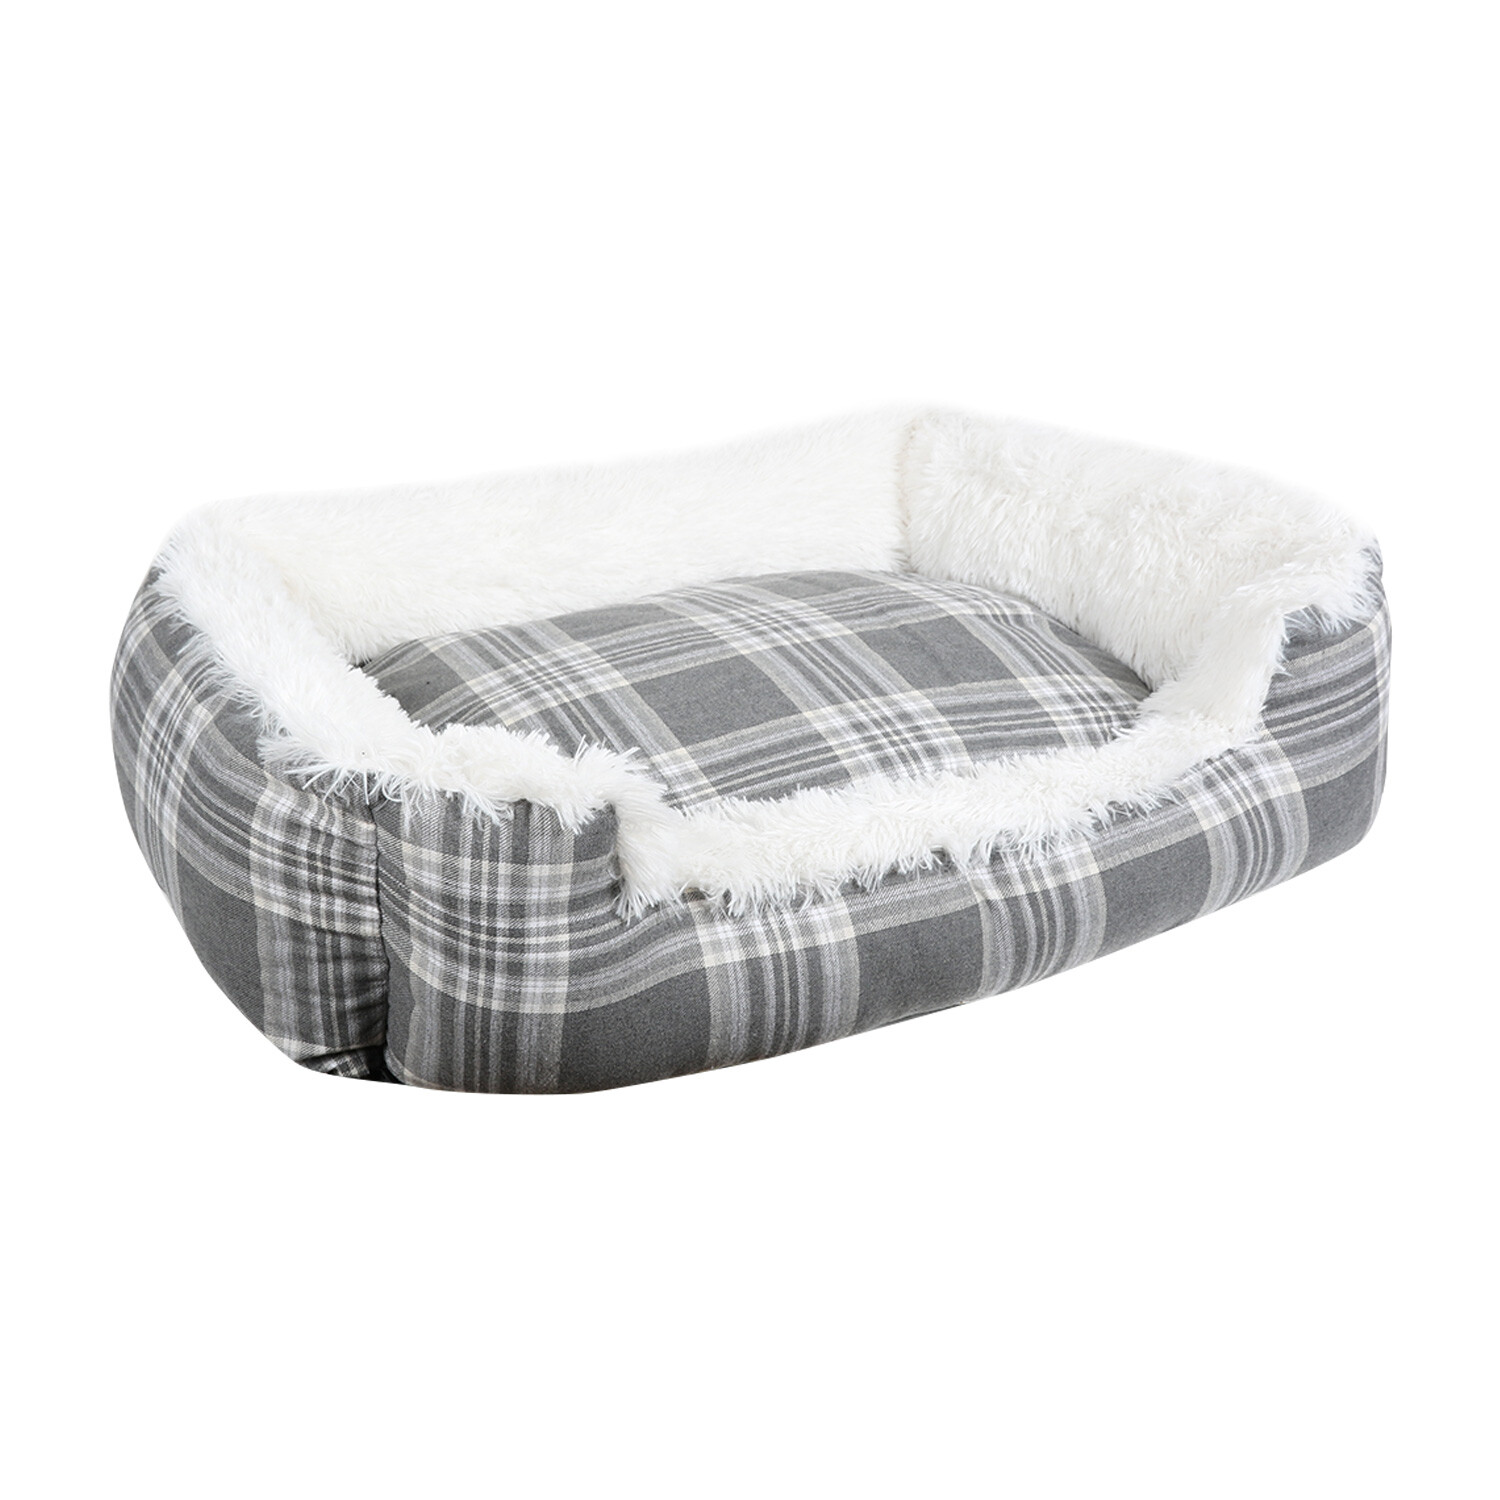 Clever Paws Medium Grey Check Super Fluffy Pet Bed Image 2